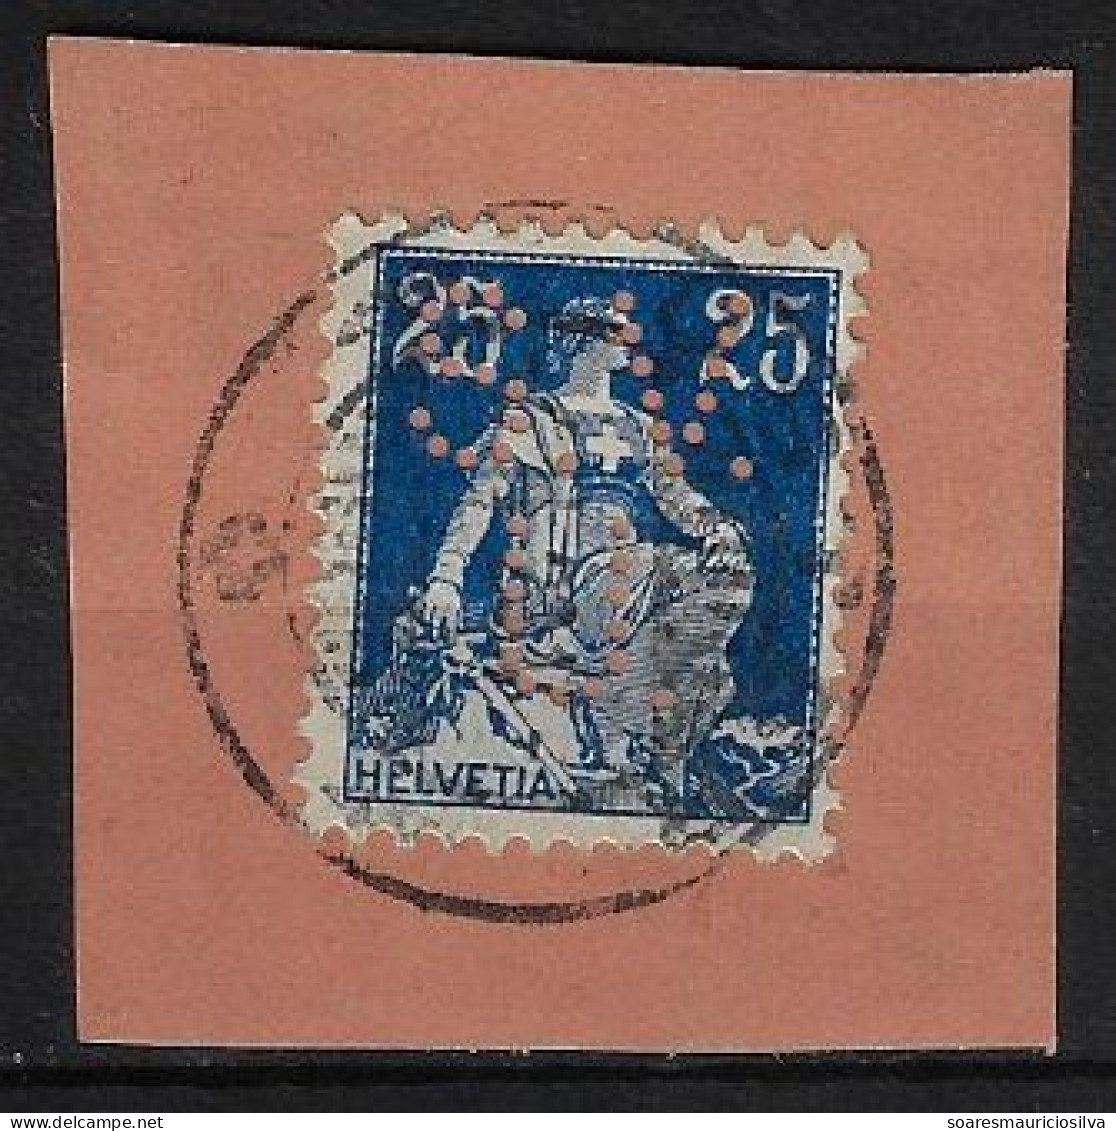 Switzerland 1904/1931 Cover Fragment Stamp With Perfin S.V./U. By Schweizerische Volksbank From Ulster Lochung Perfore - Perfin